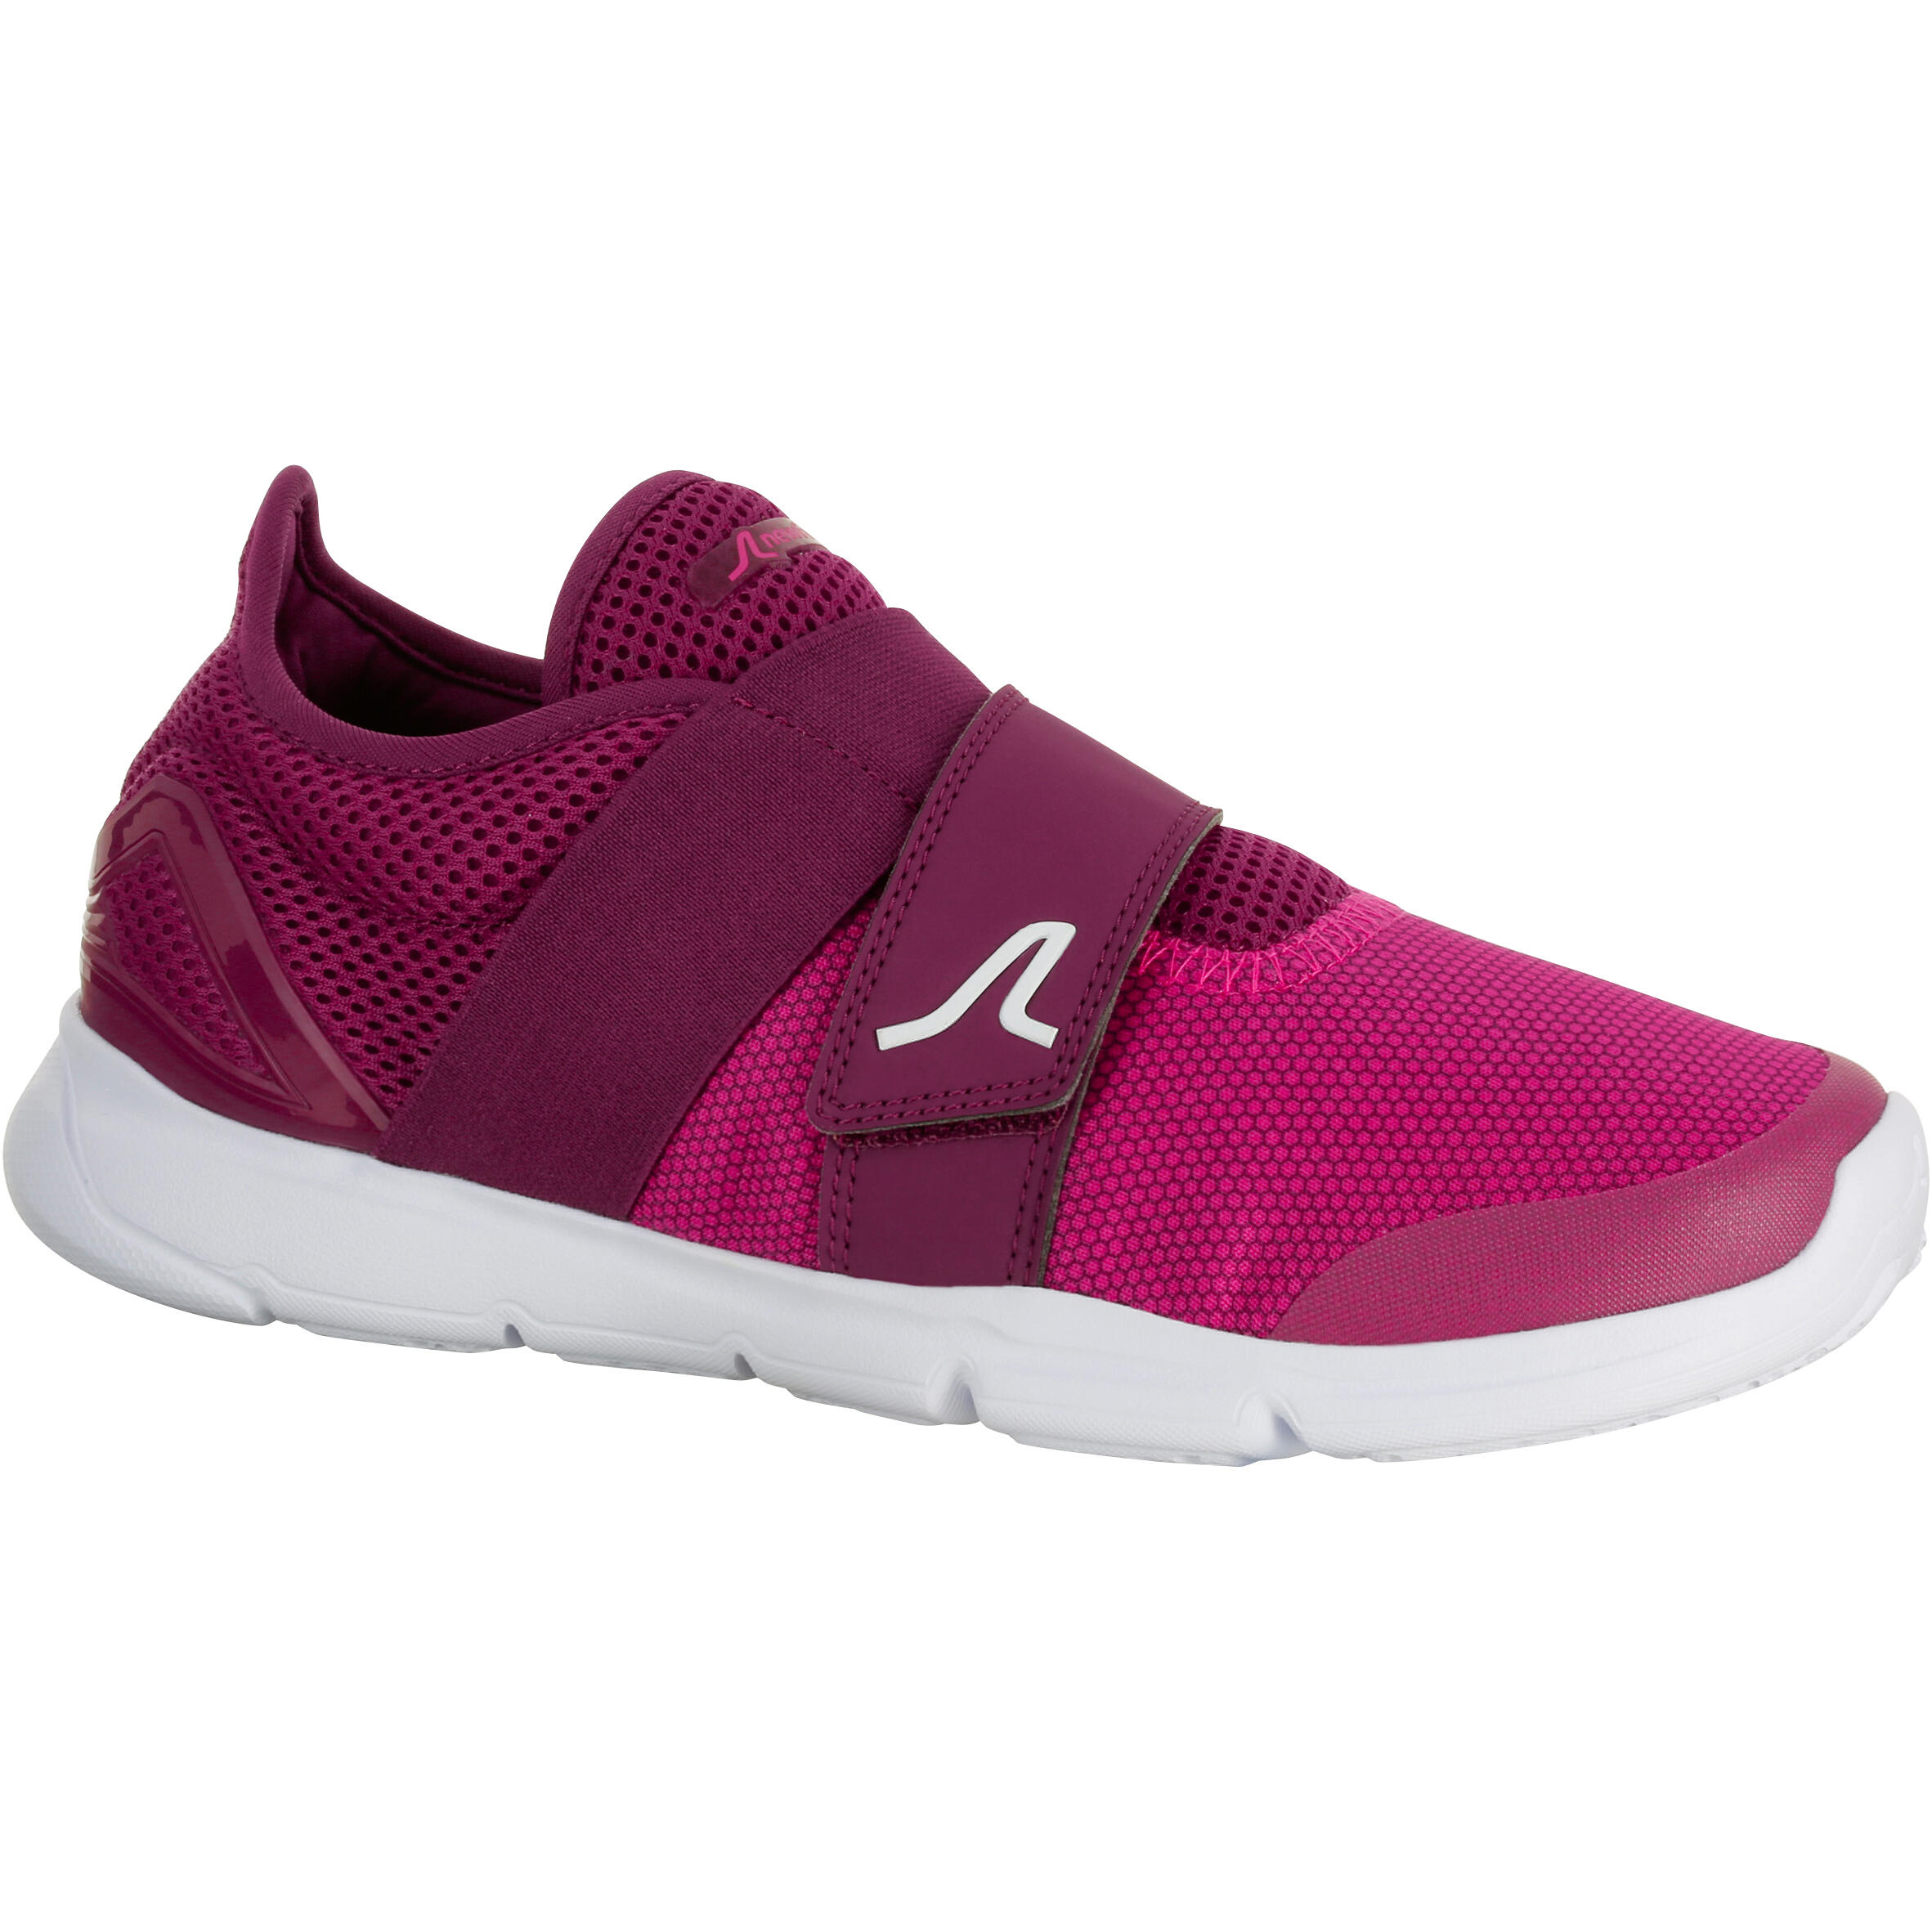 decathlon shoes online shopping